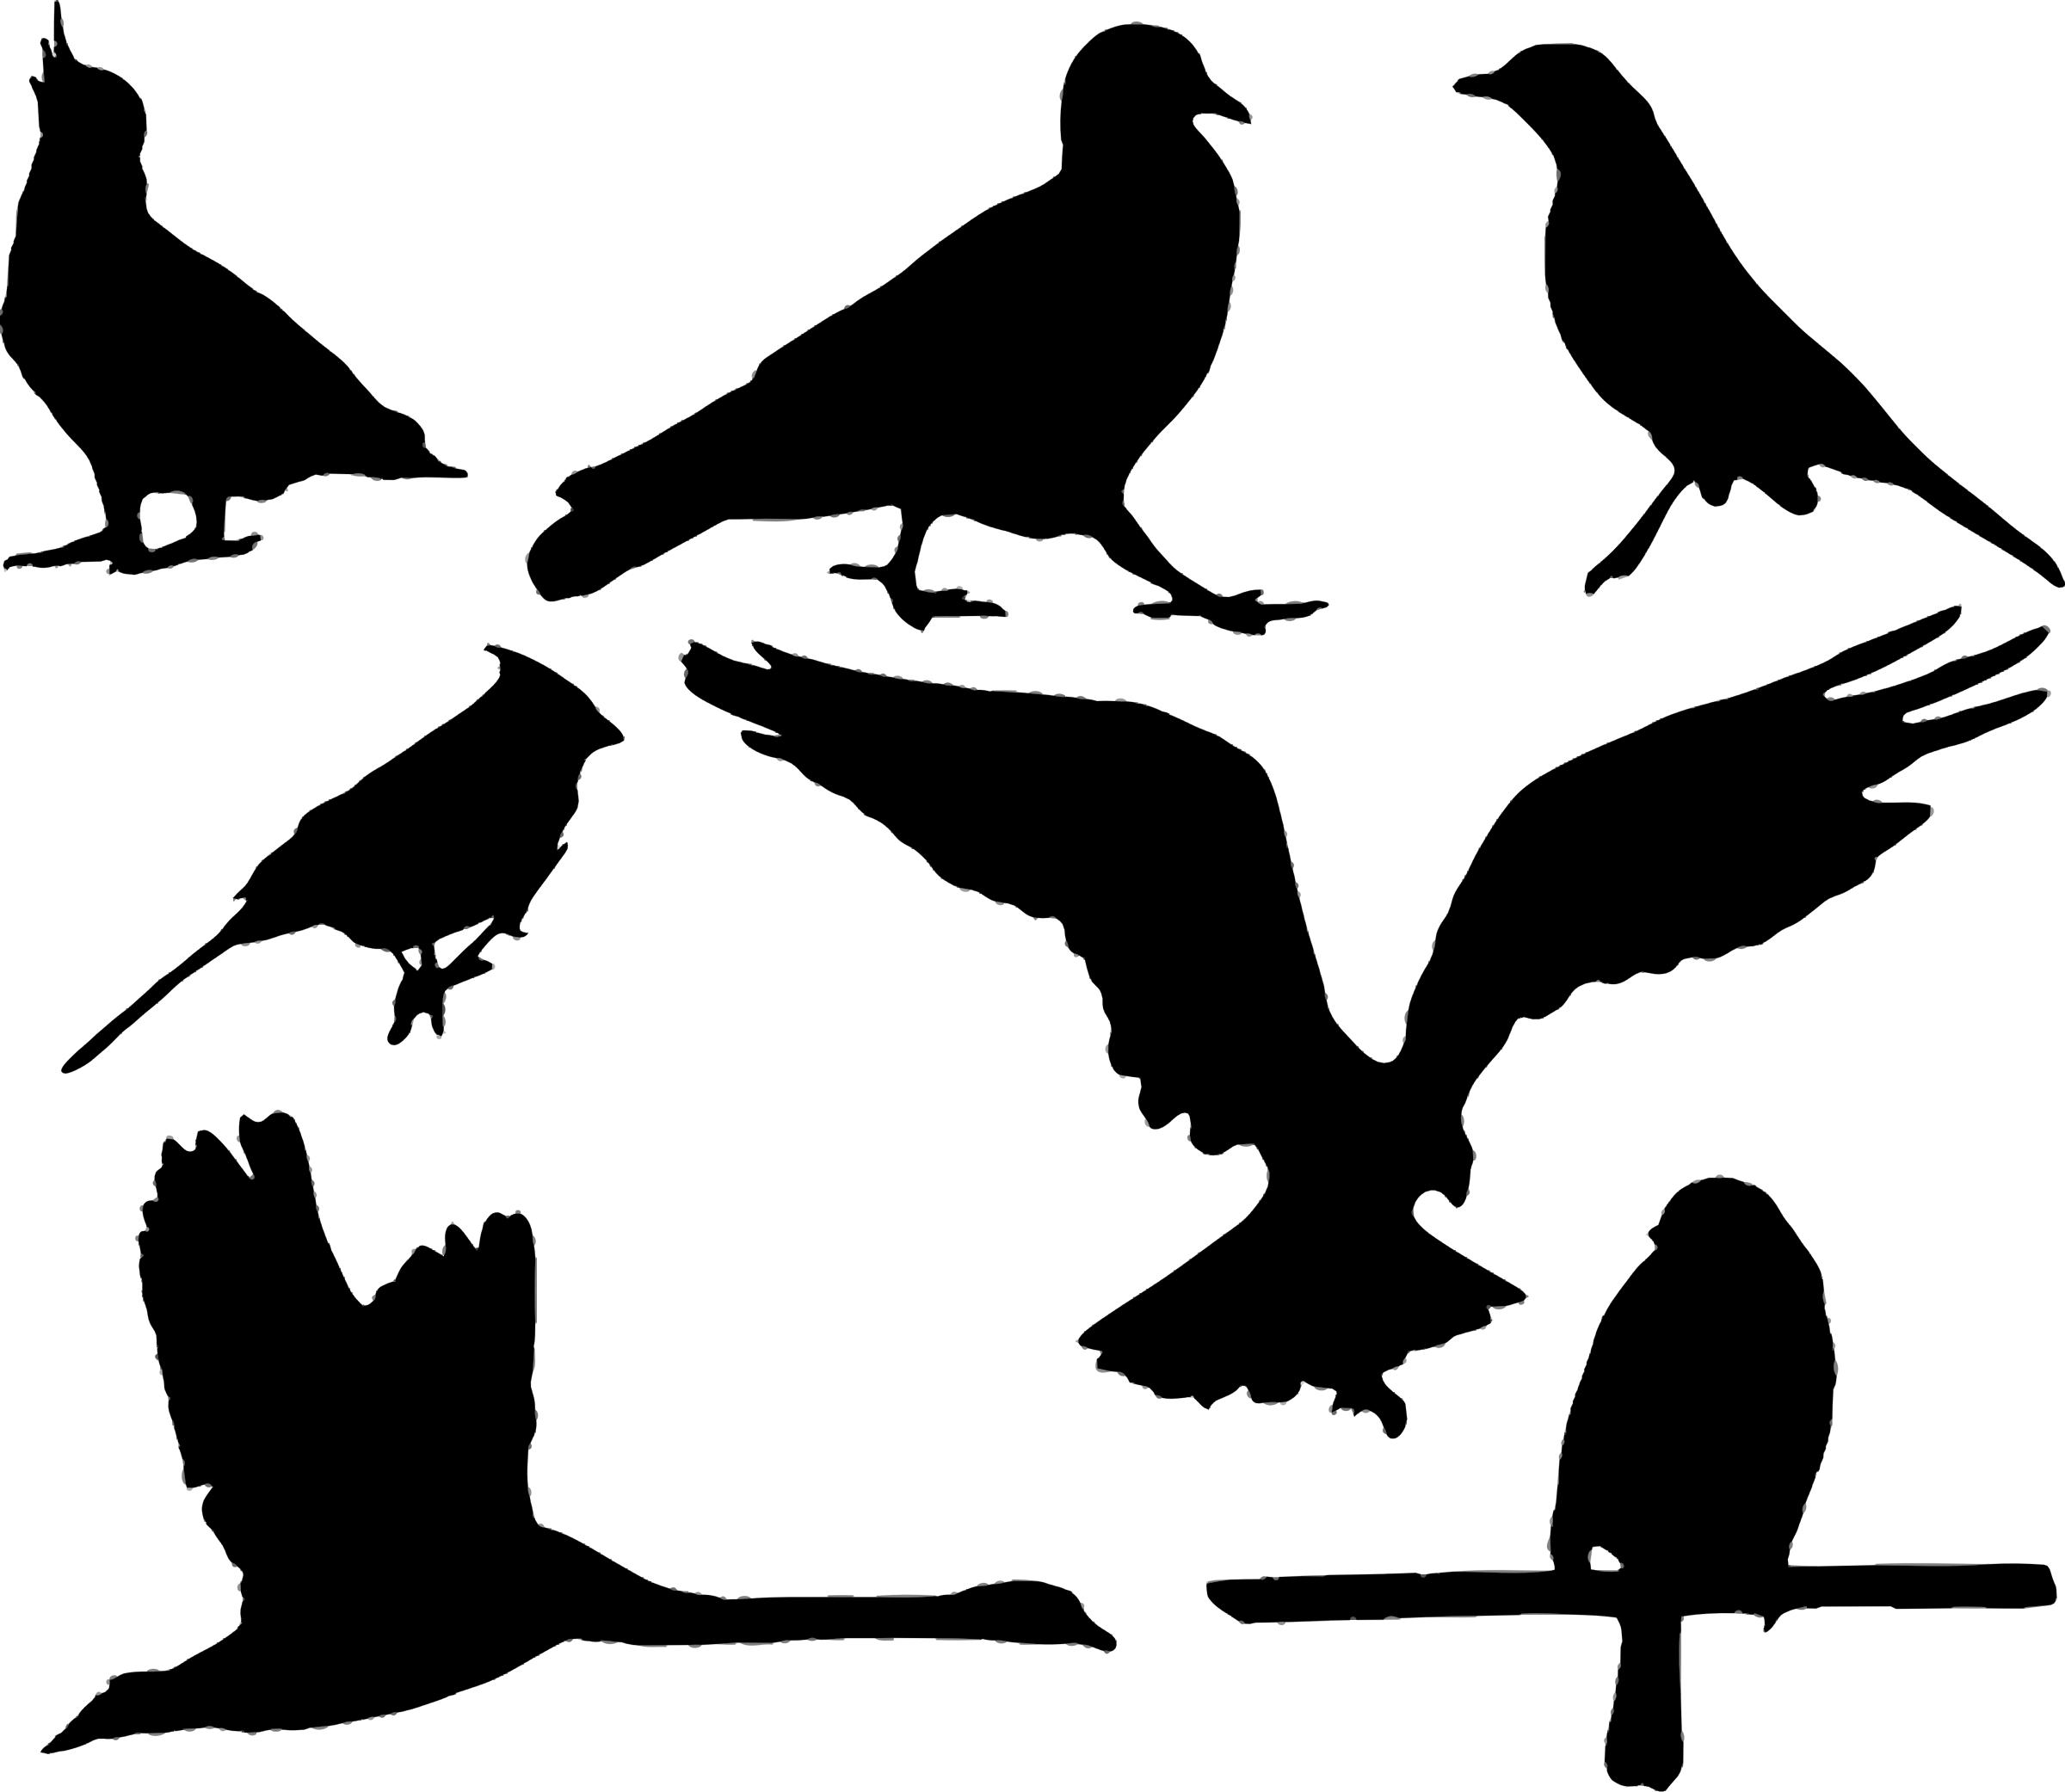 Bird silhouettes png